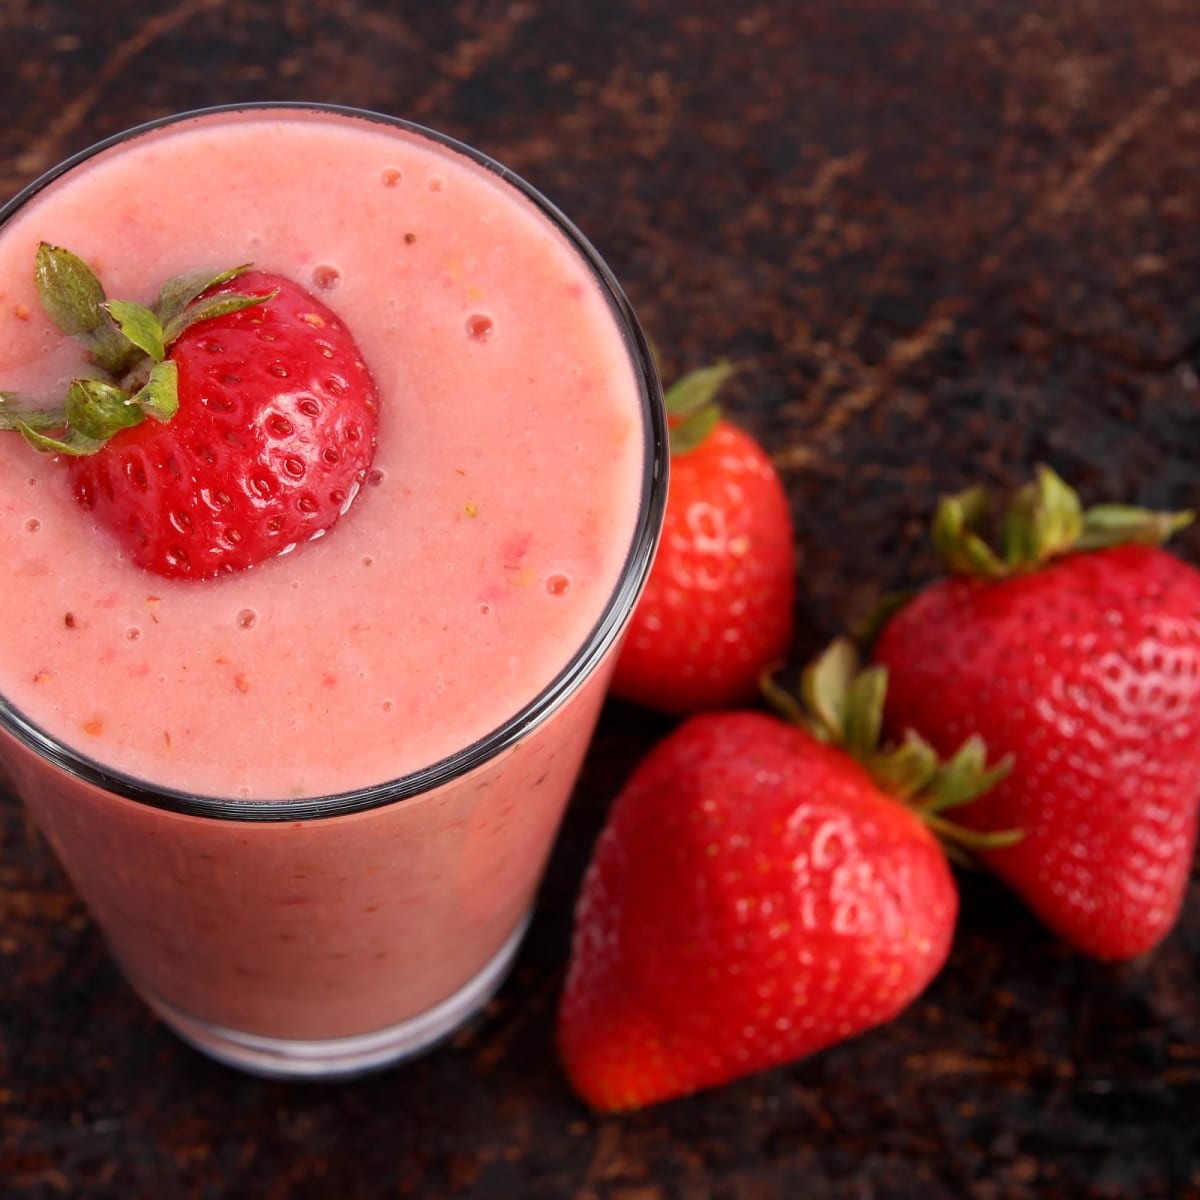 Smoothie Recipes For Cancer Patients To Gain Weight